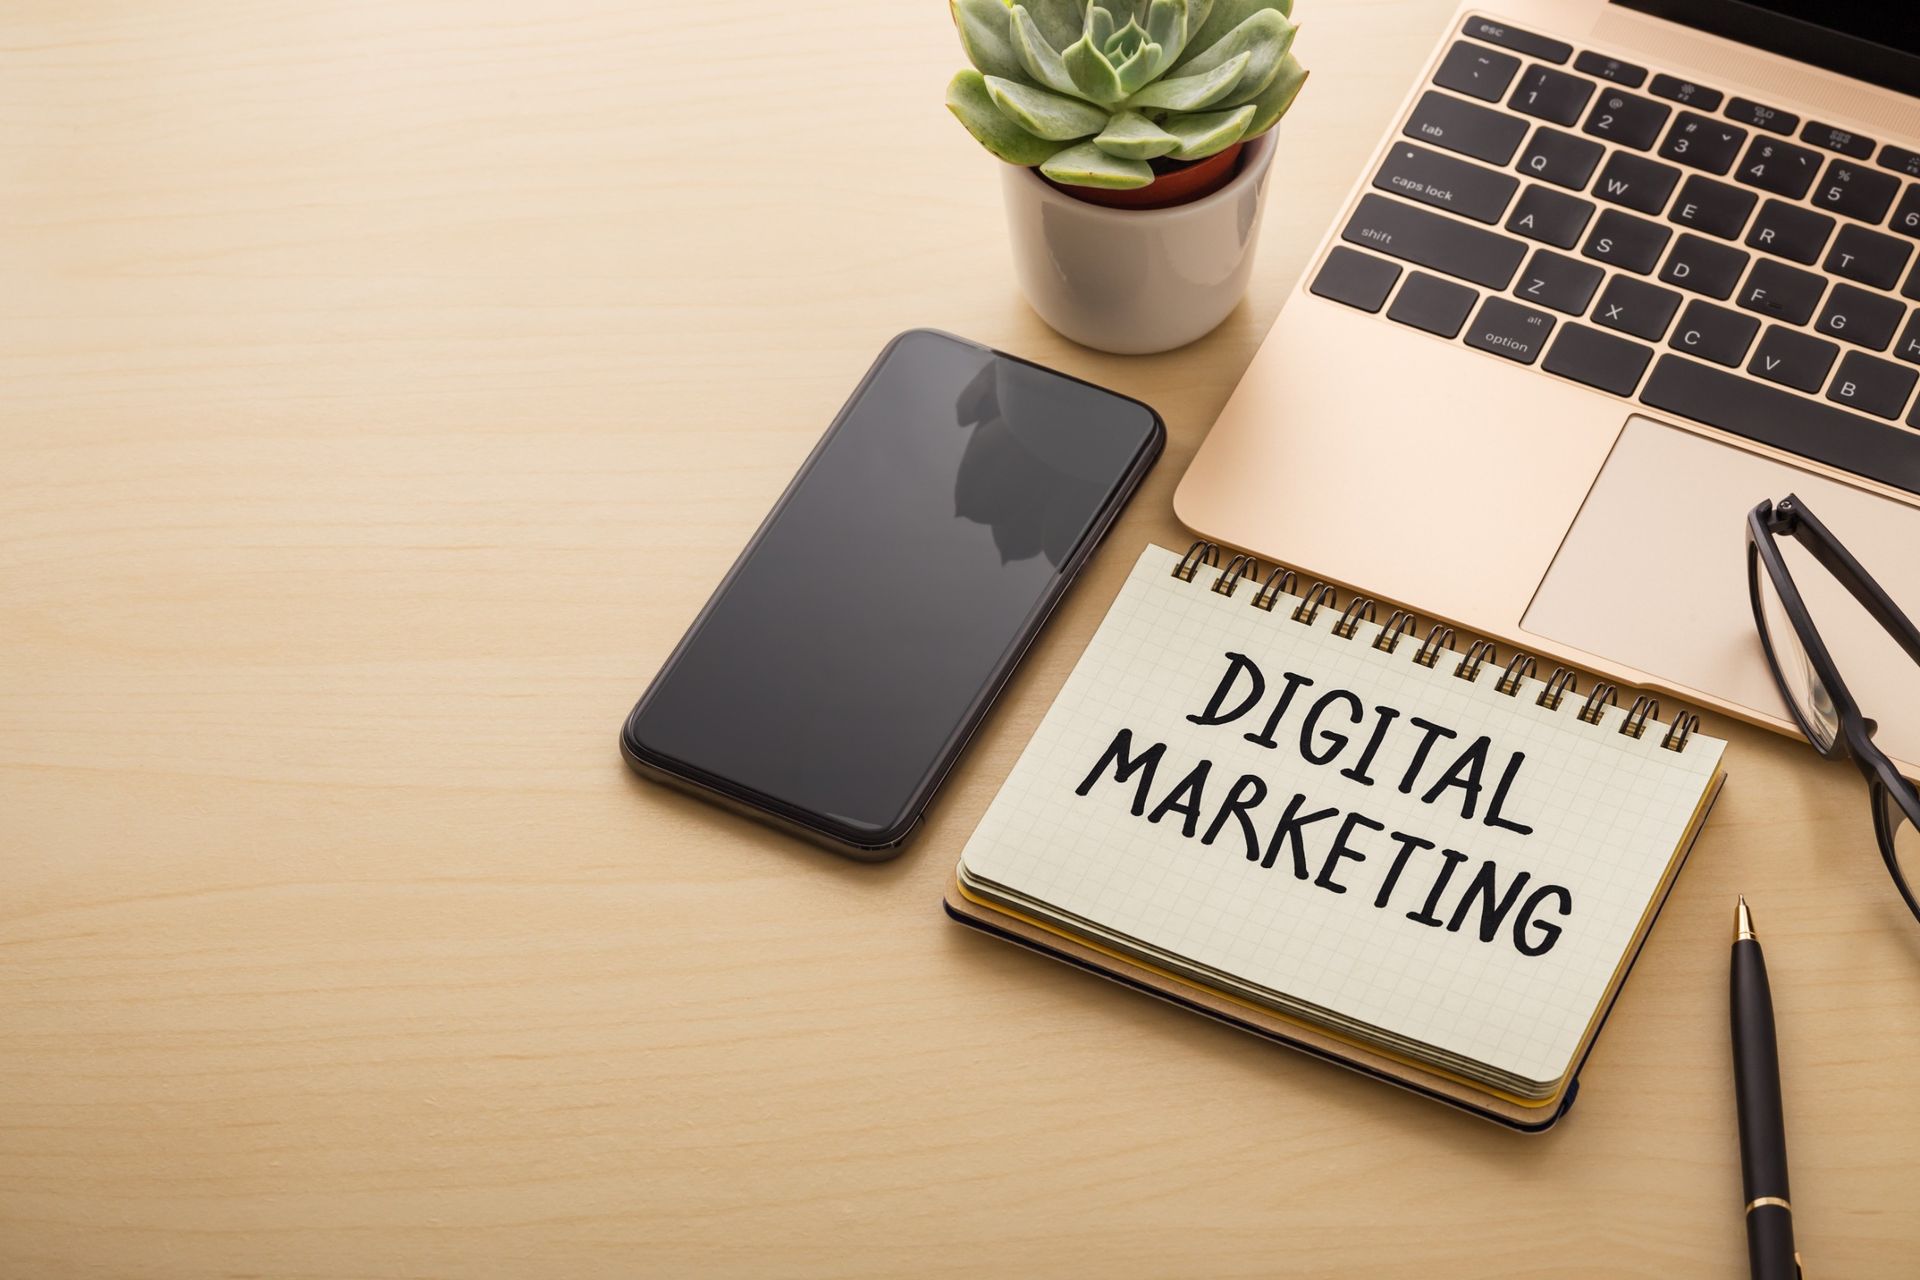 Why Is Digital Marketing Important for Business?